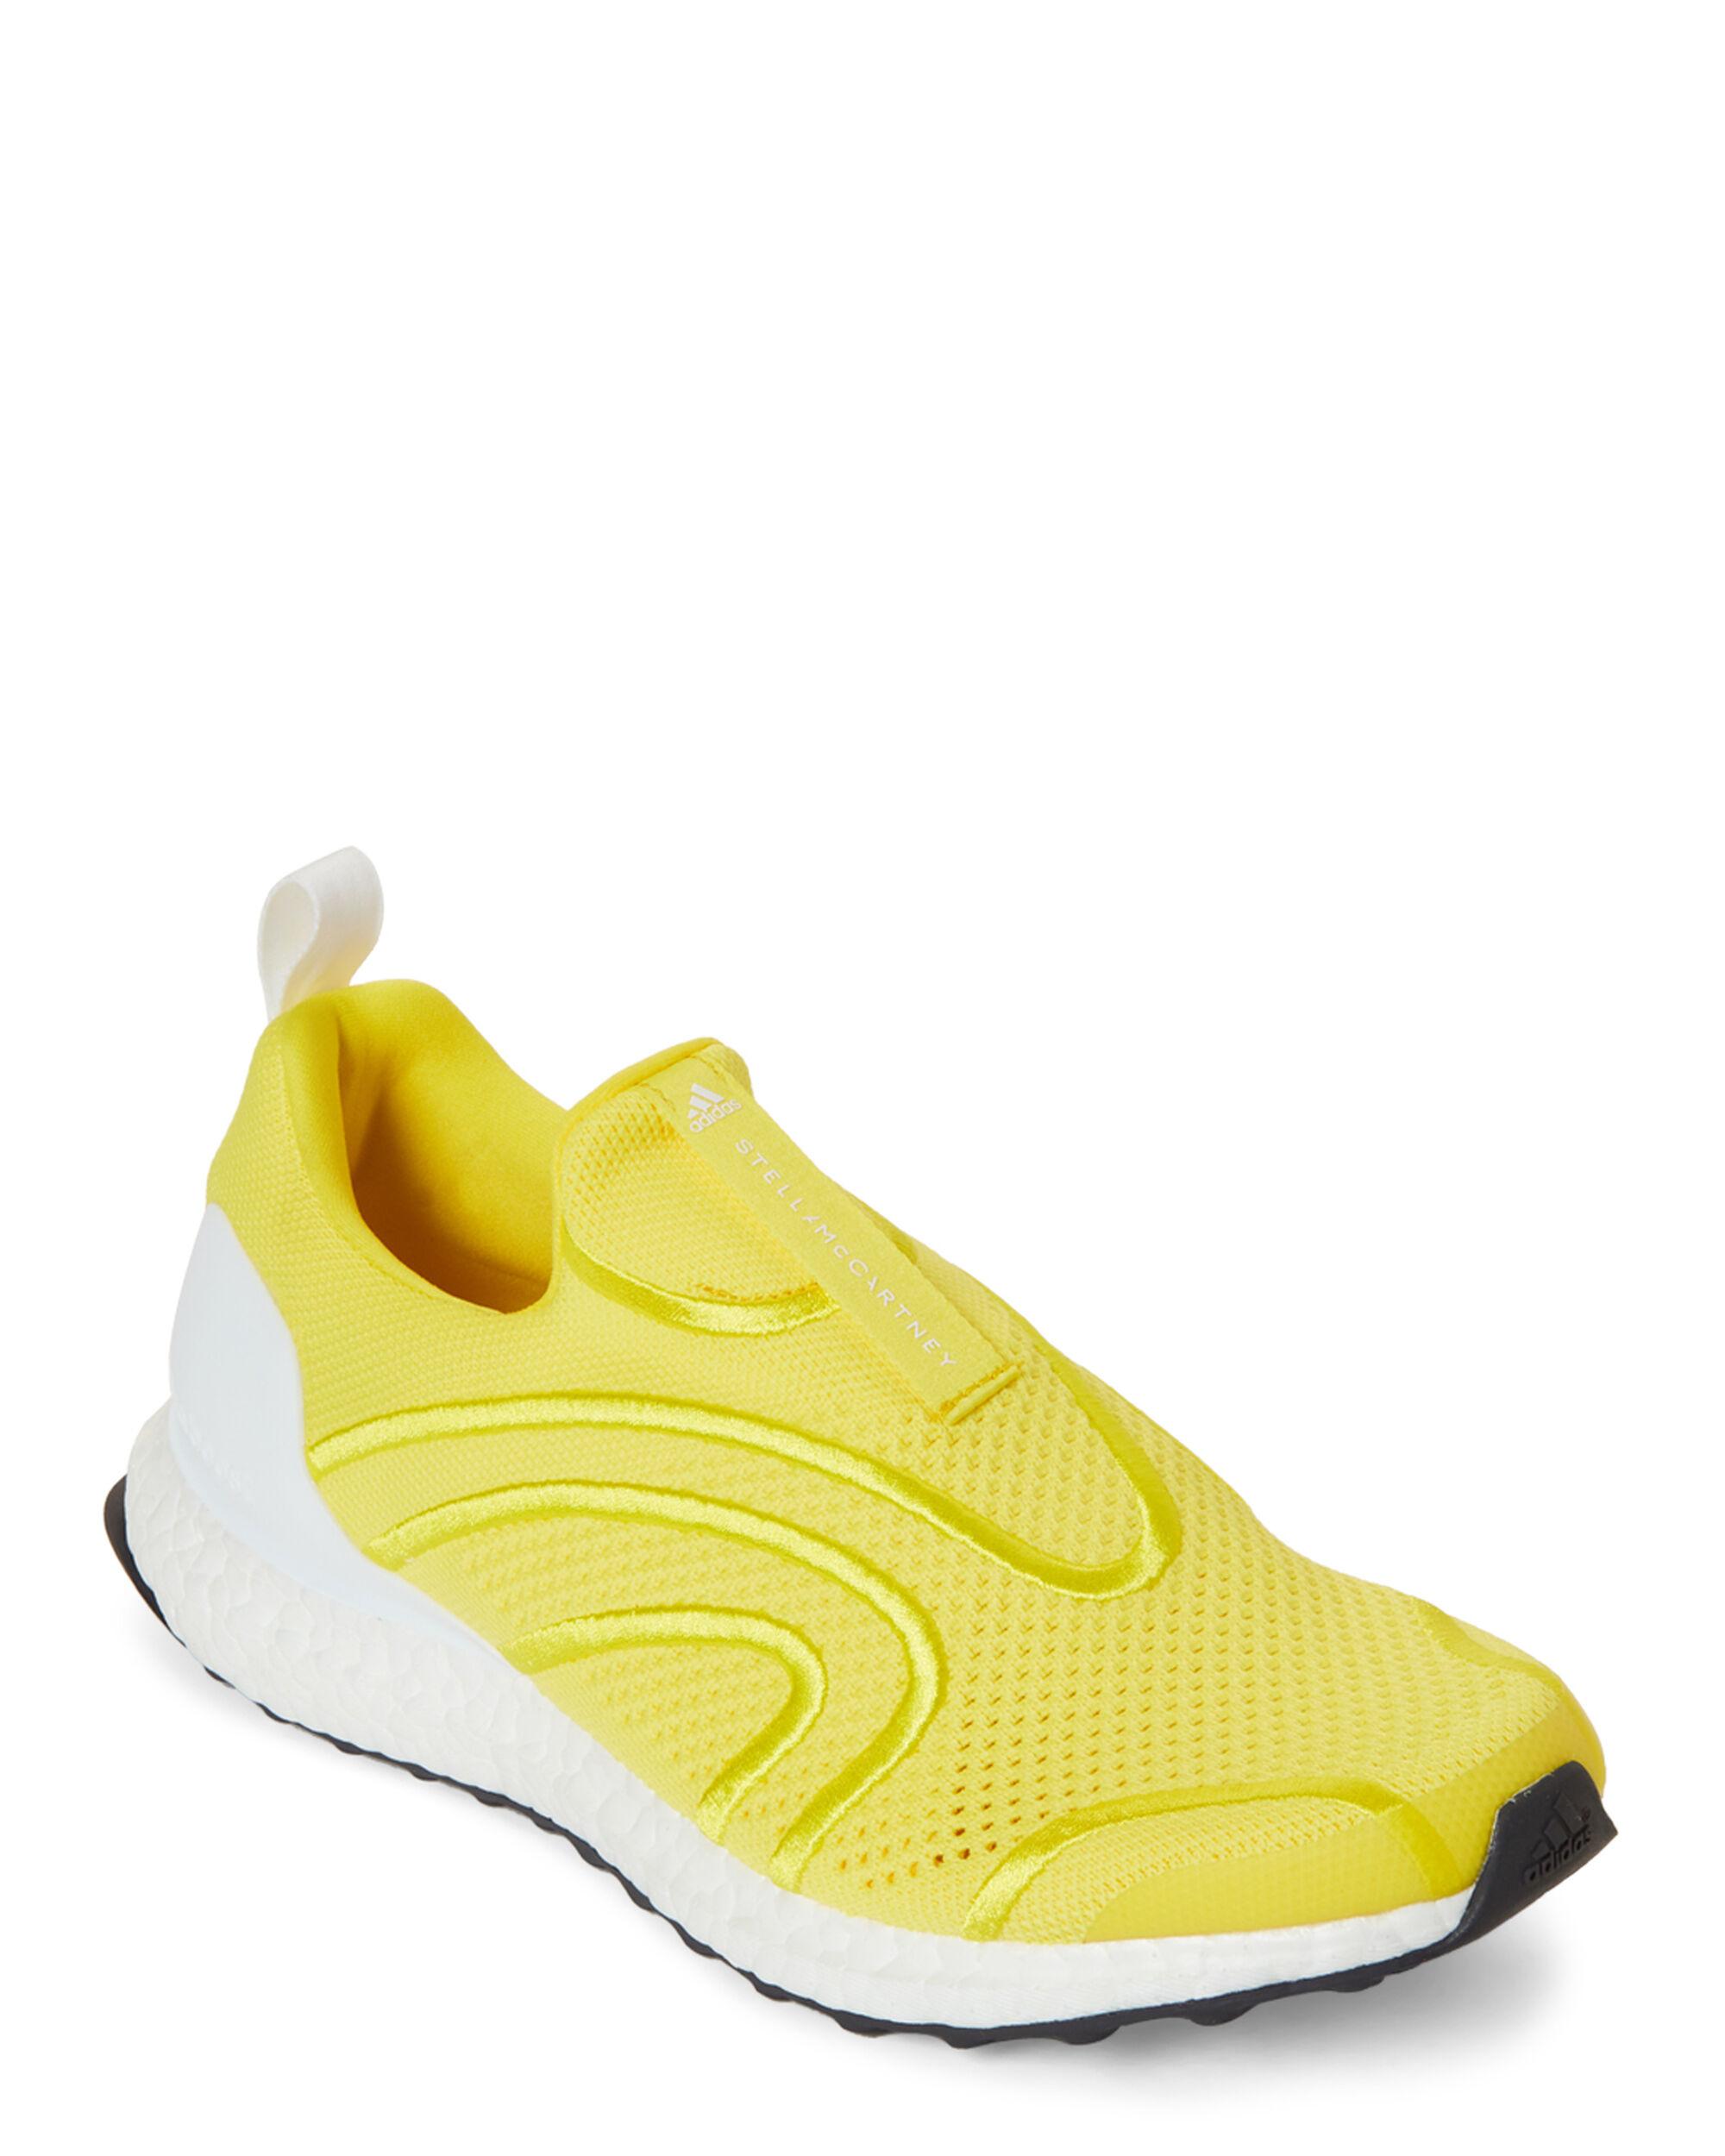 ultra boost uncaged yellow